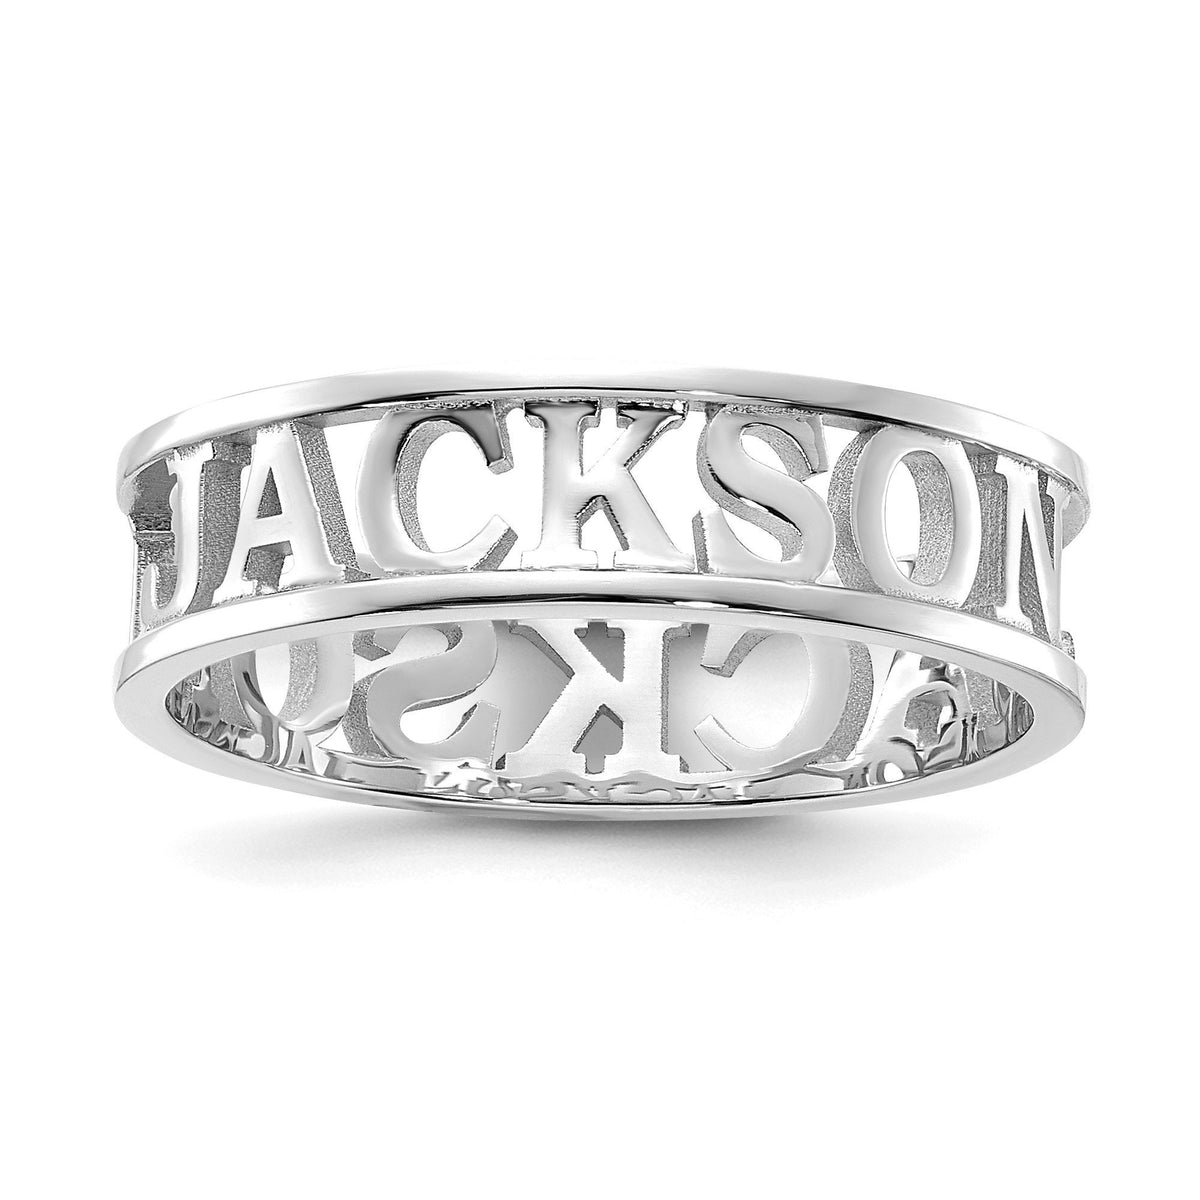 Personalized Name Ring Available in 10k Yellow Gold, 10k White Gold, Sterling Silver or Gold Plated Silver Gift Box Included Ring Sizes 8-12